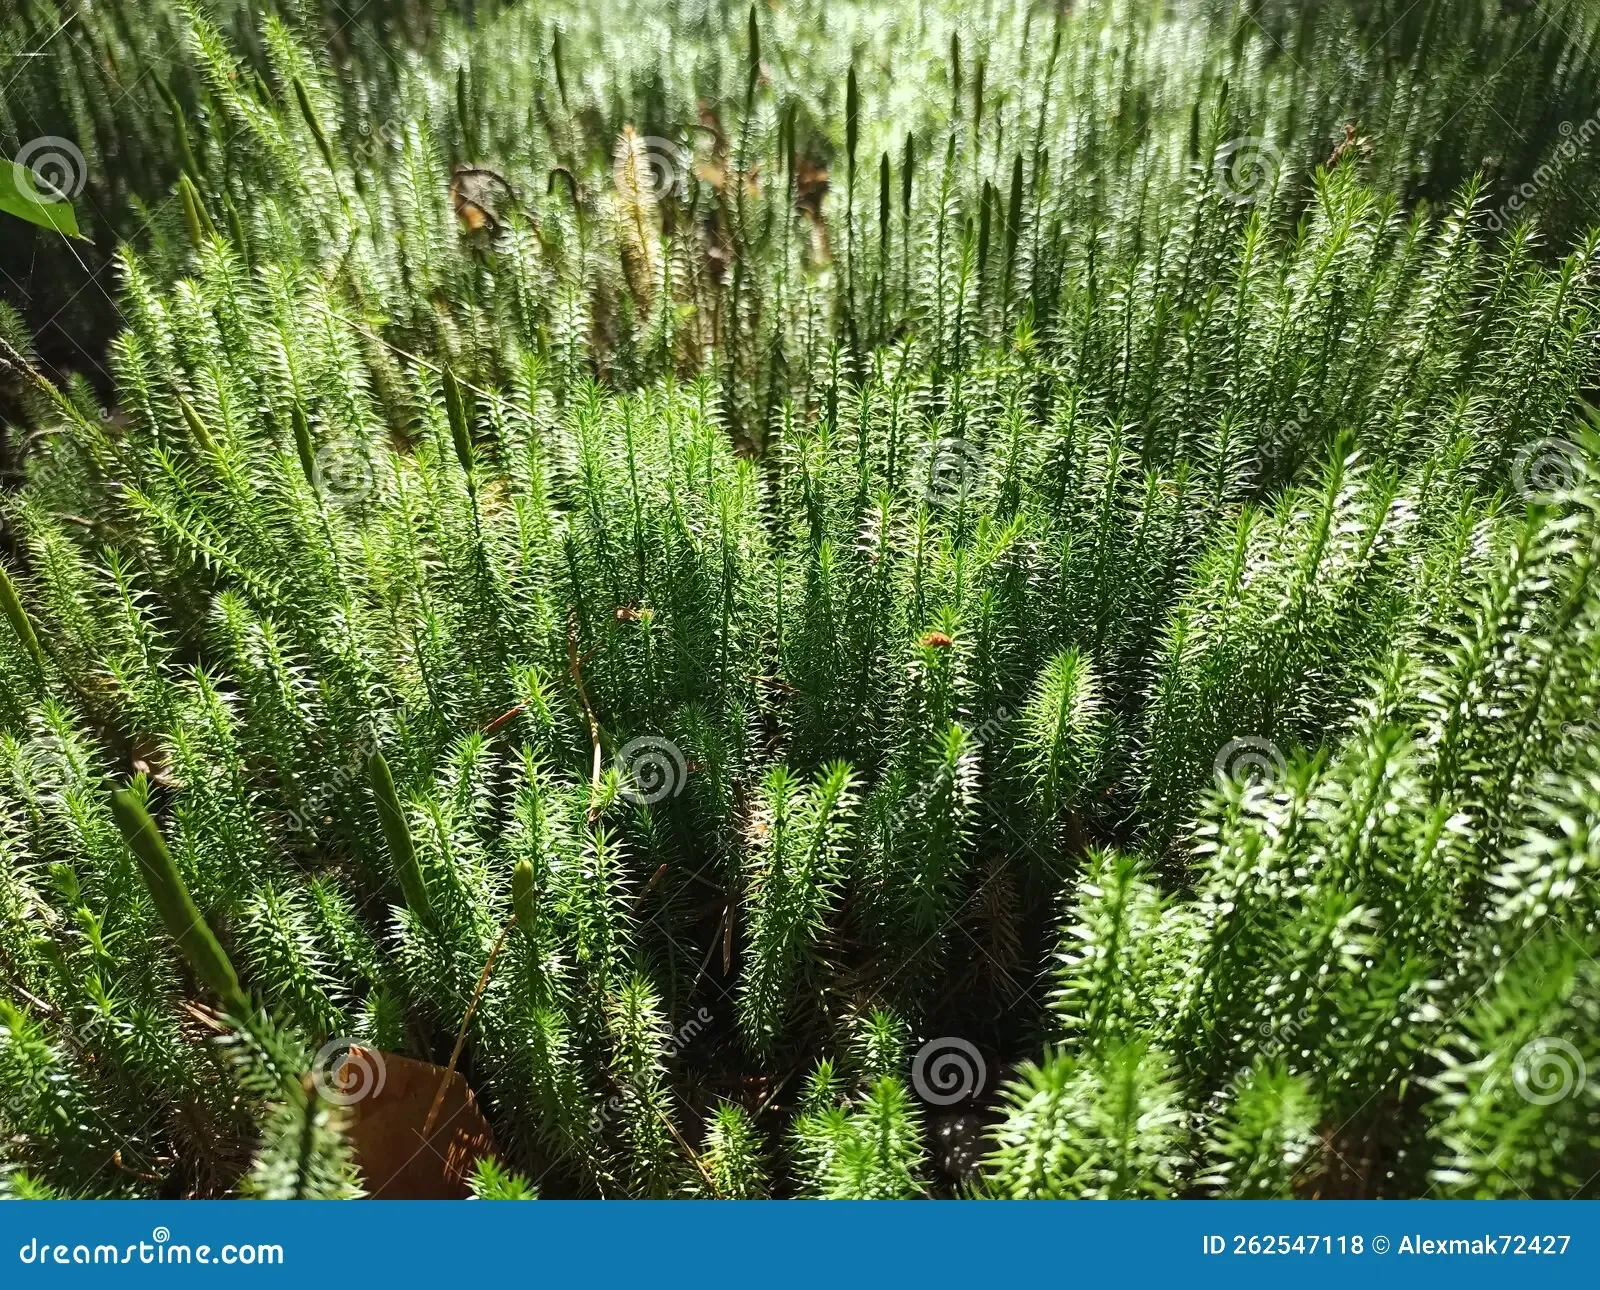 cypress-leaved-plait-moss-closeup-hypnum-cupressiforme-growing-forest-dense-vegetation-thickets-sunny-day-wood-beautiful-262547118.jpg